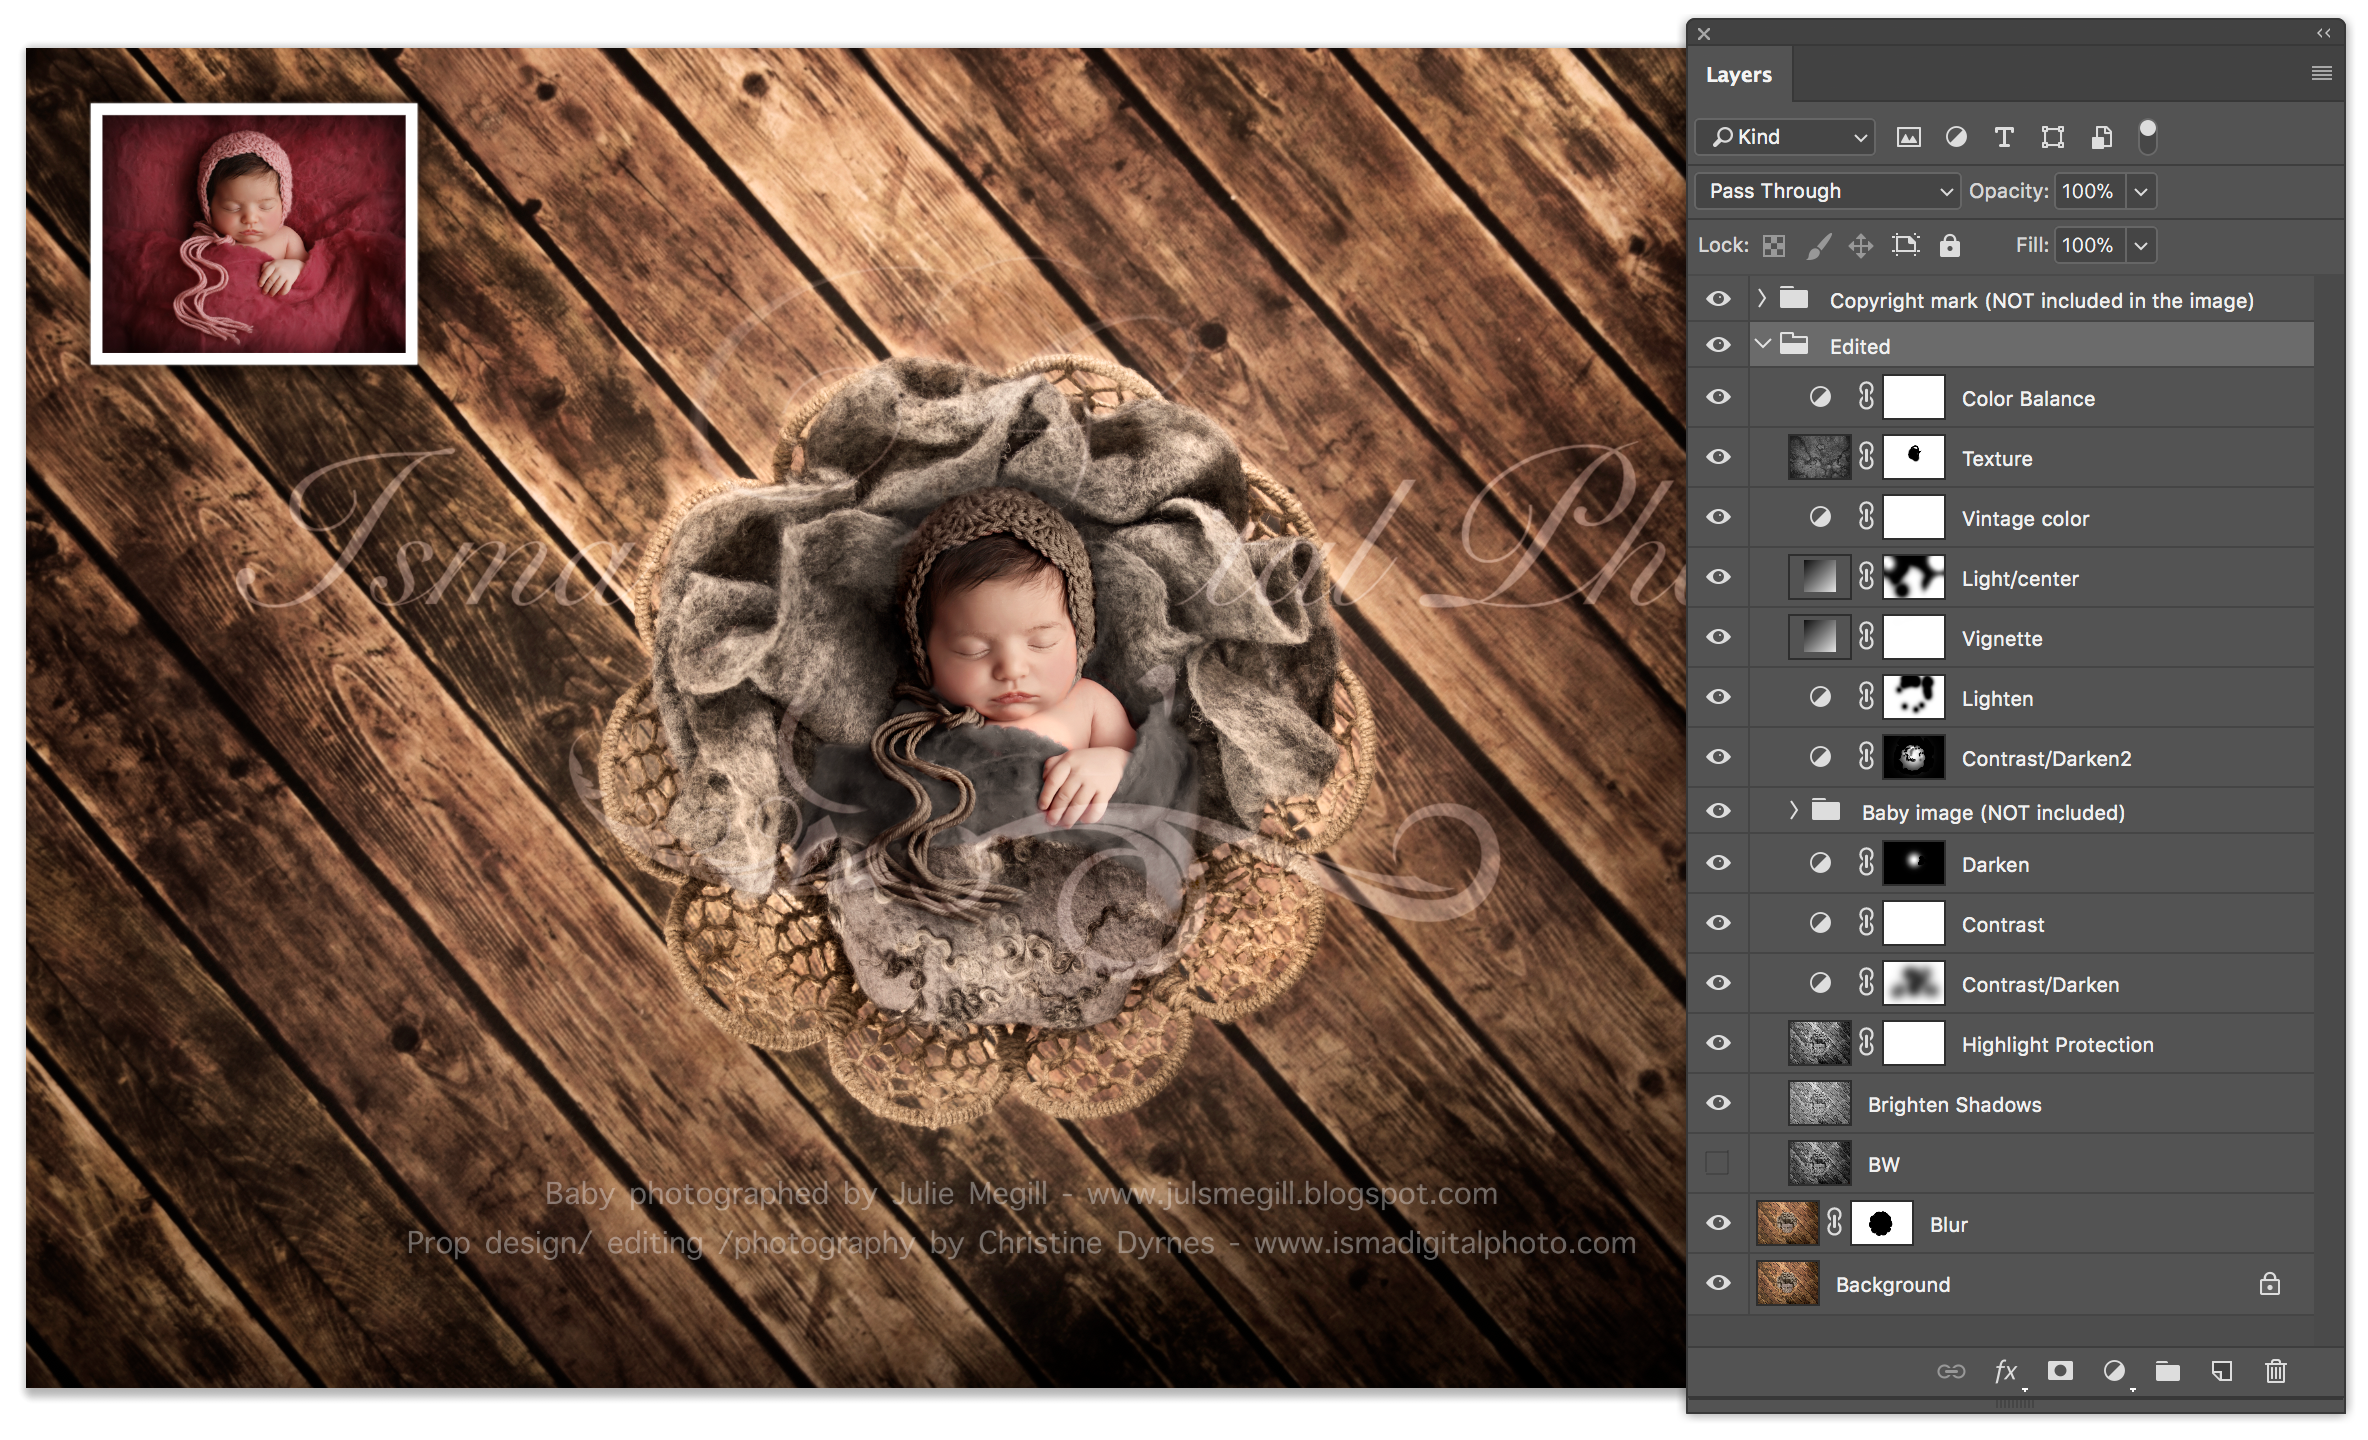 Newborn felted wool bed 7  Digital Backdrop /Props for Newborn /baby photography - High resolution digital backdrop /background - One JPG and one PSD file with layers